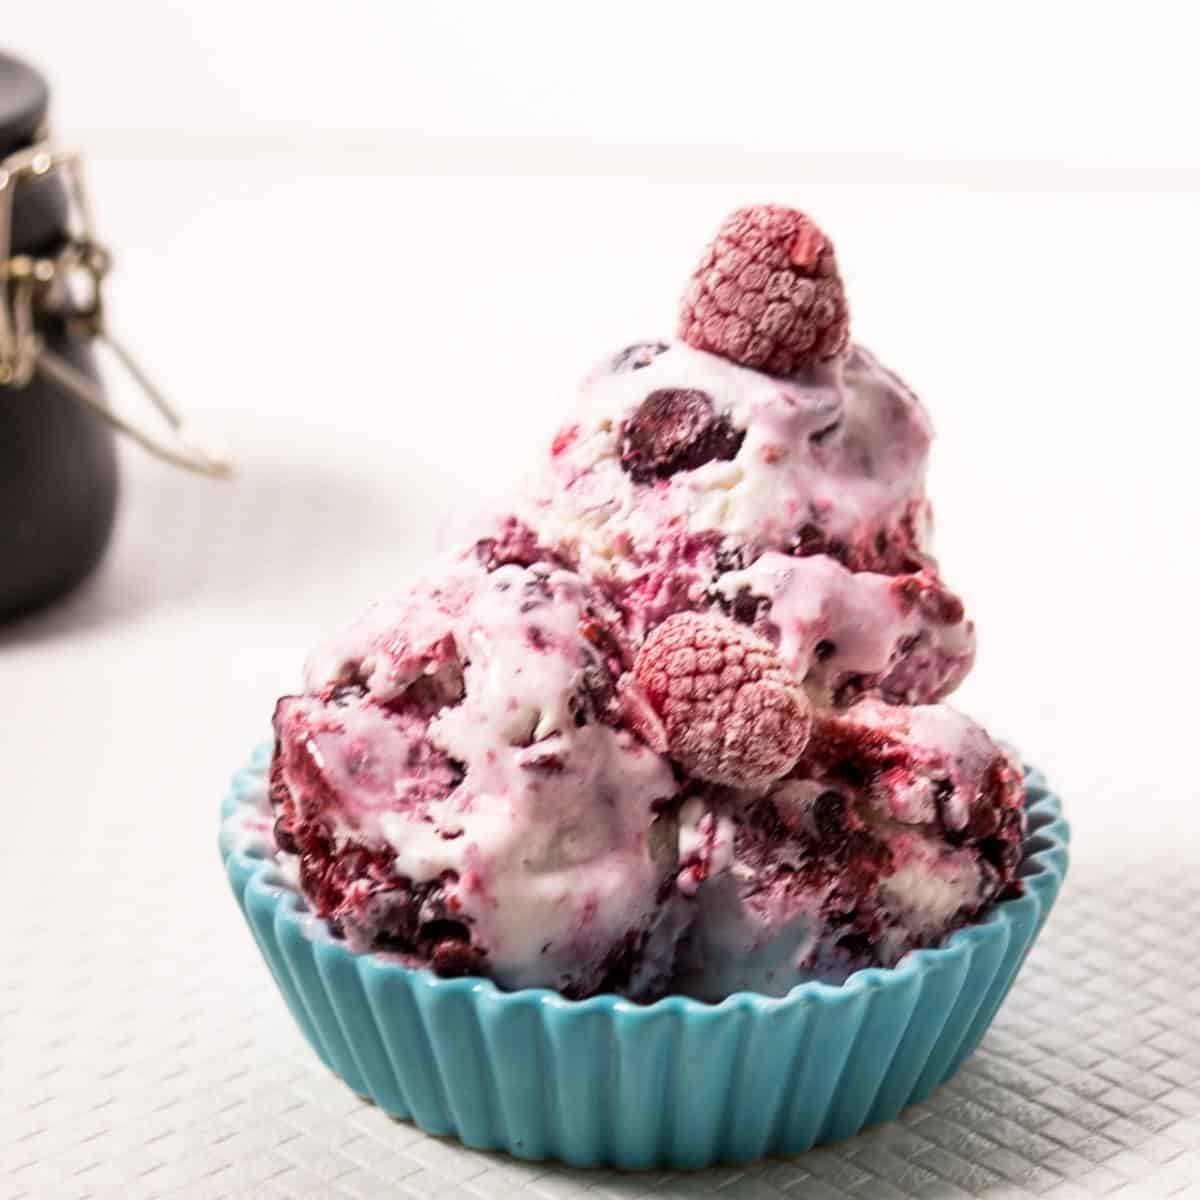 How to Make Raspberry Ice Cream without an Ice Cream Maker - Veena